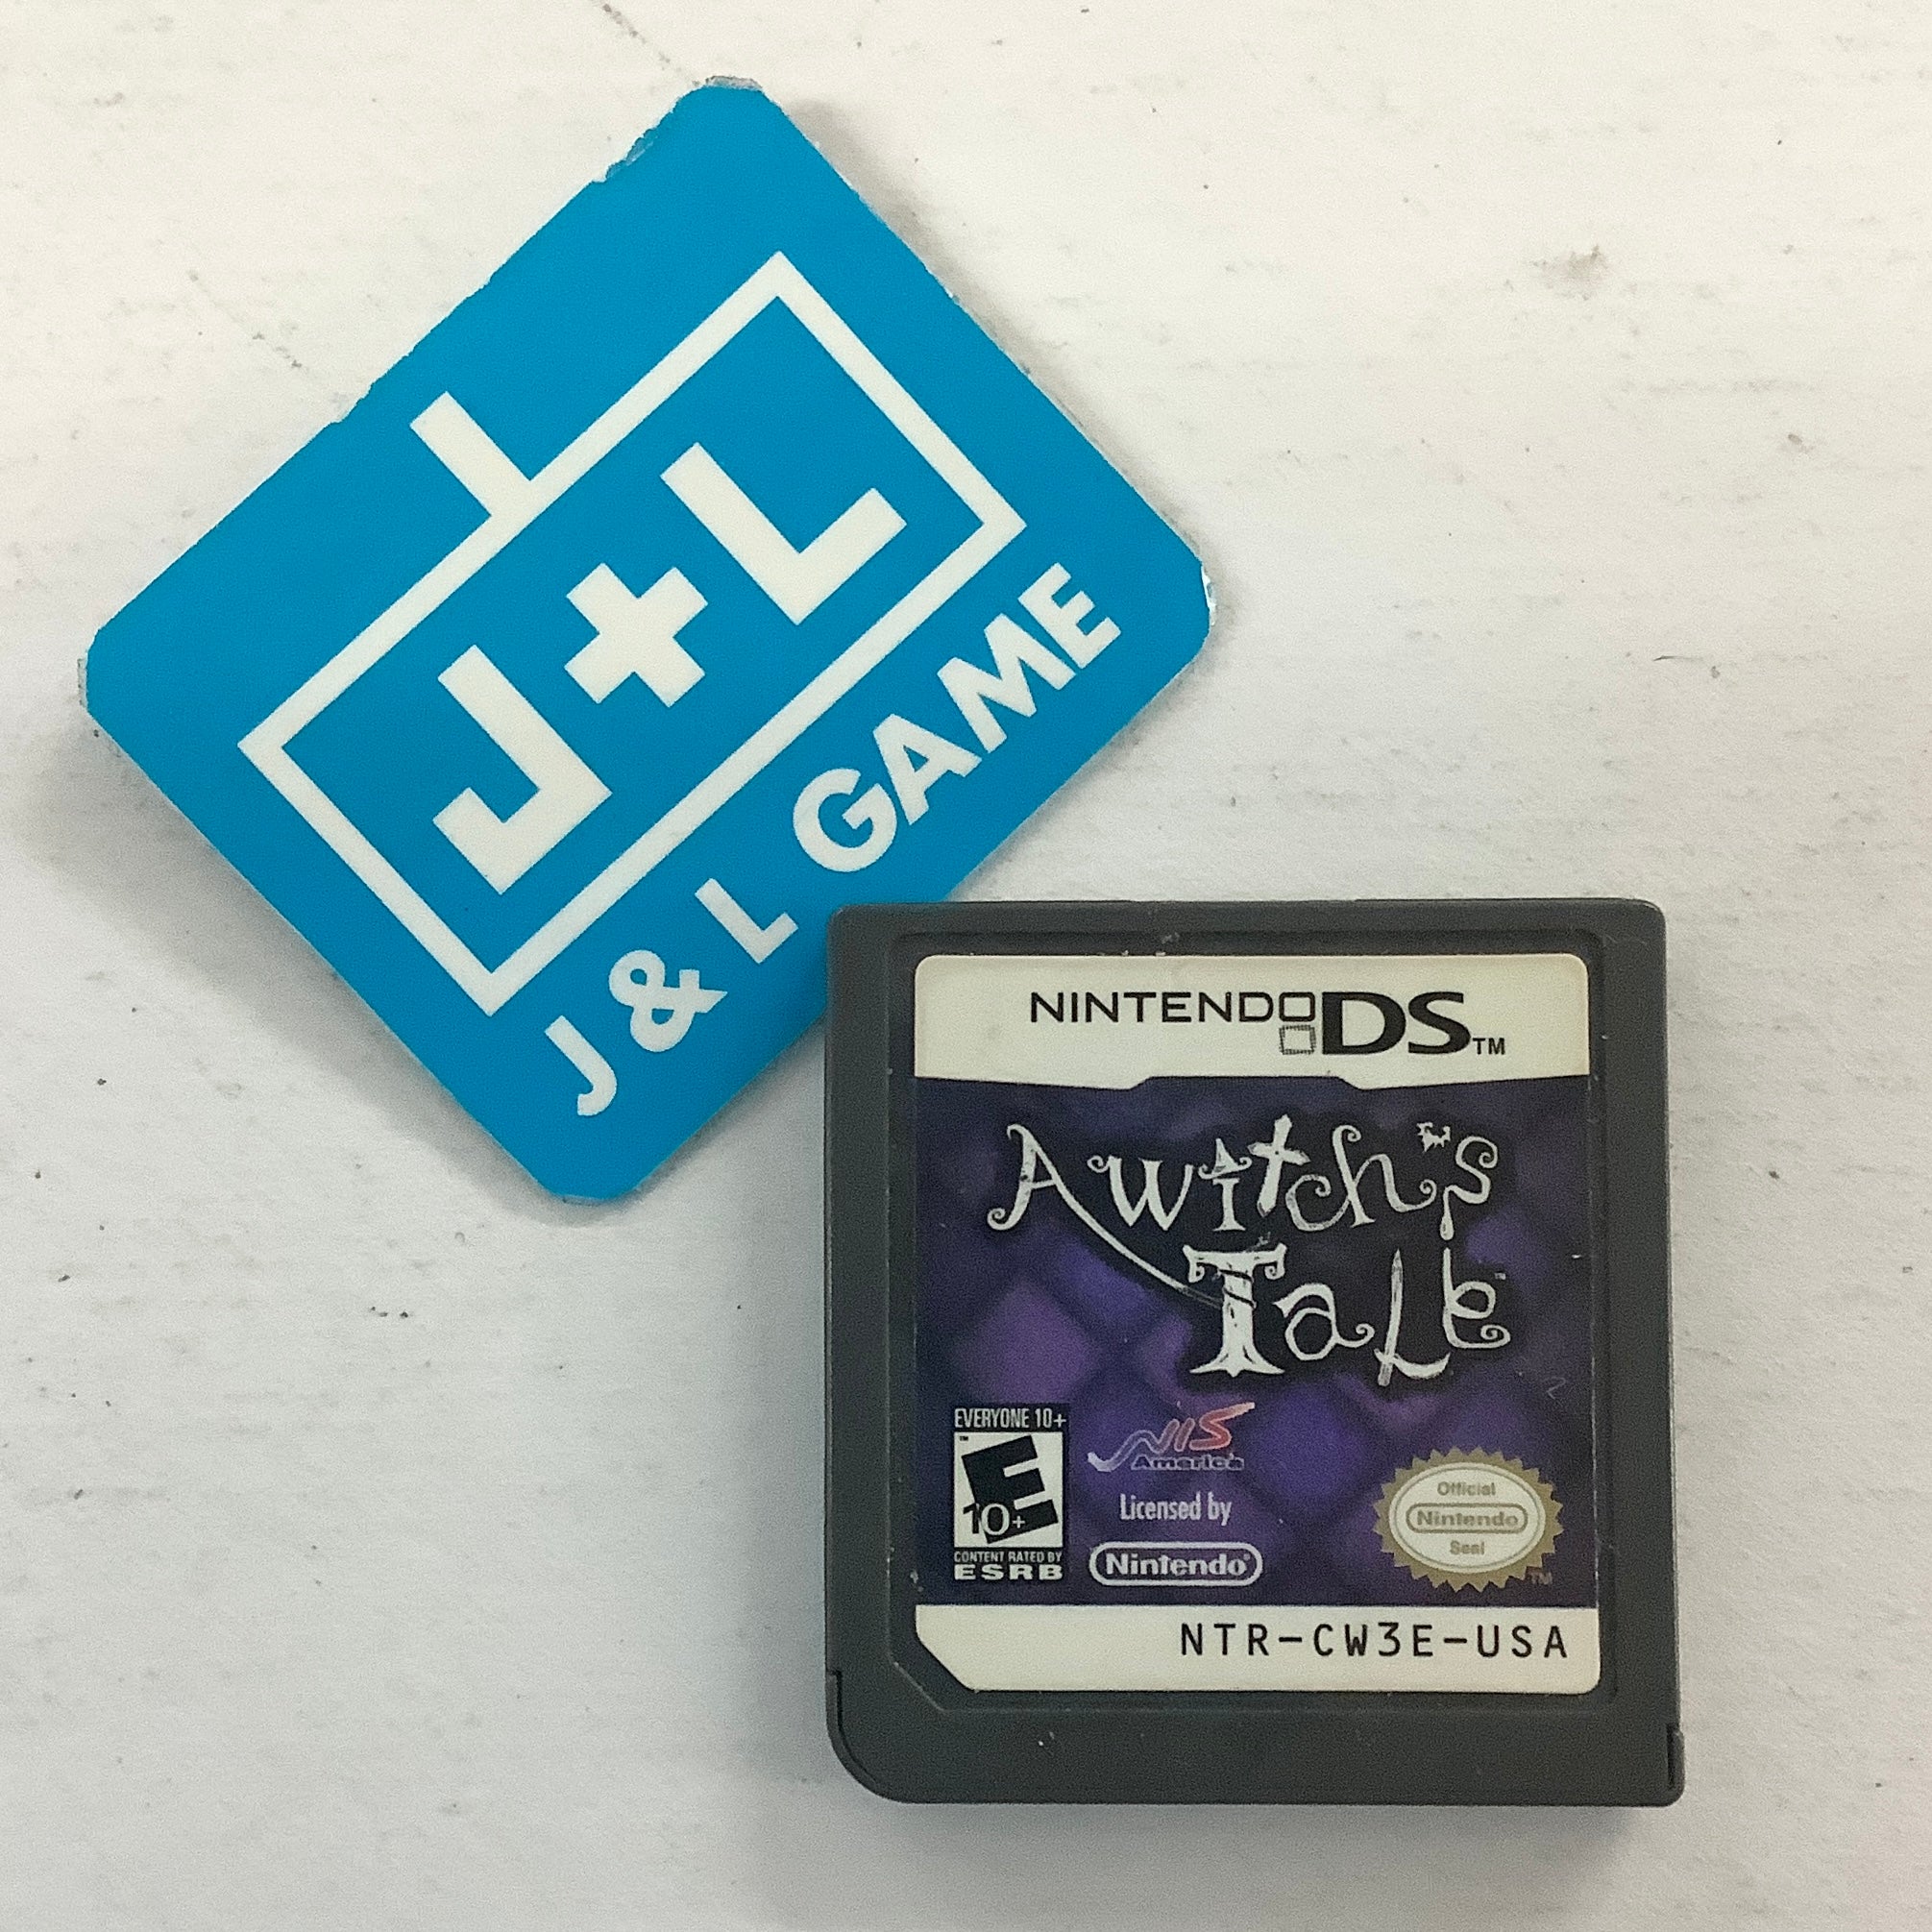 A Witch's Tale - (NDS) Nintendo DS [Pre-Owned]